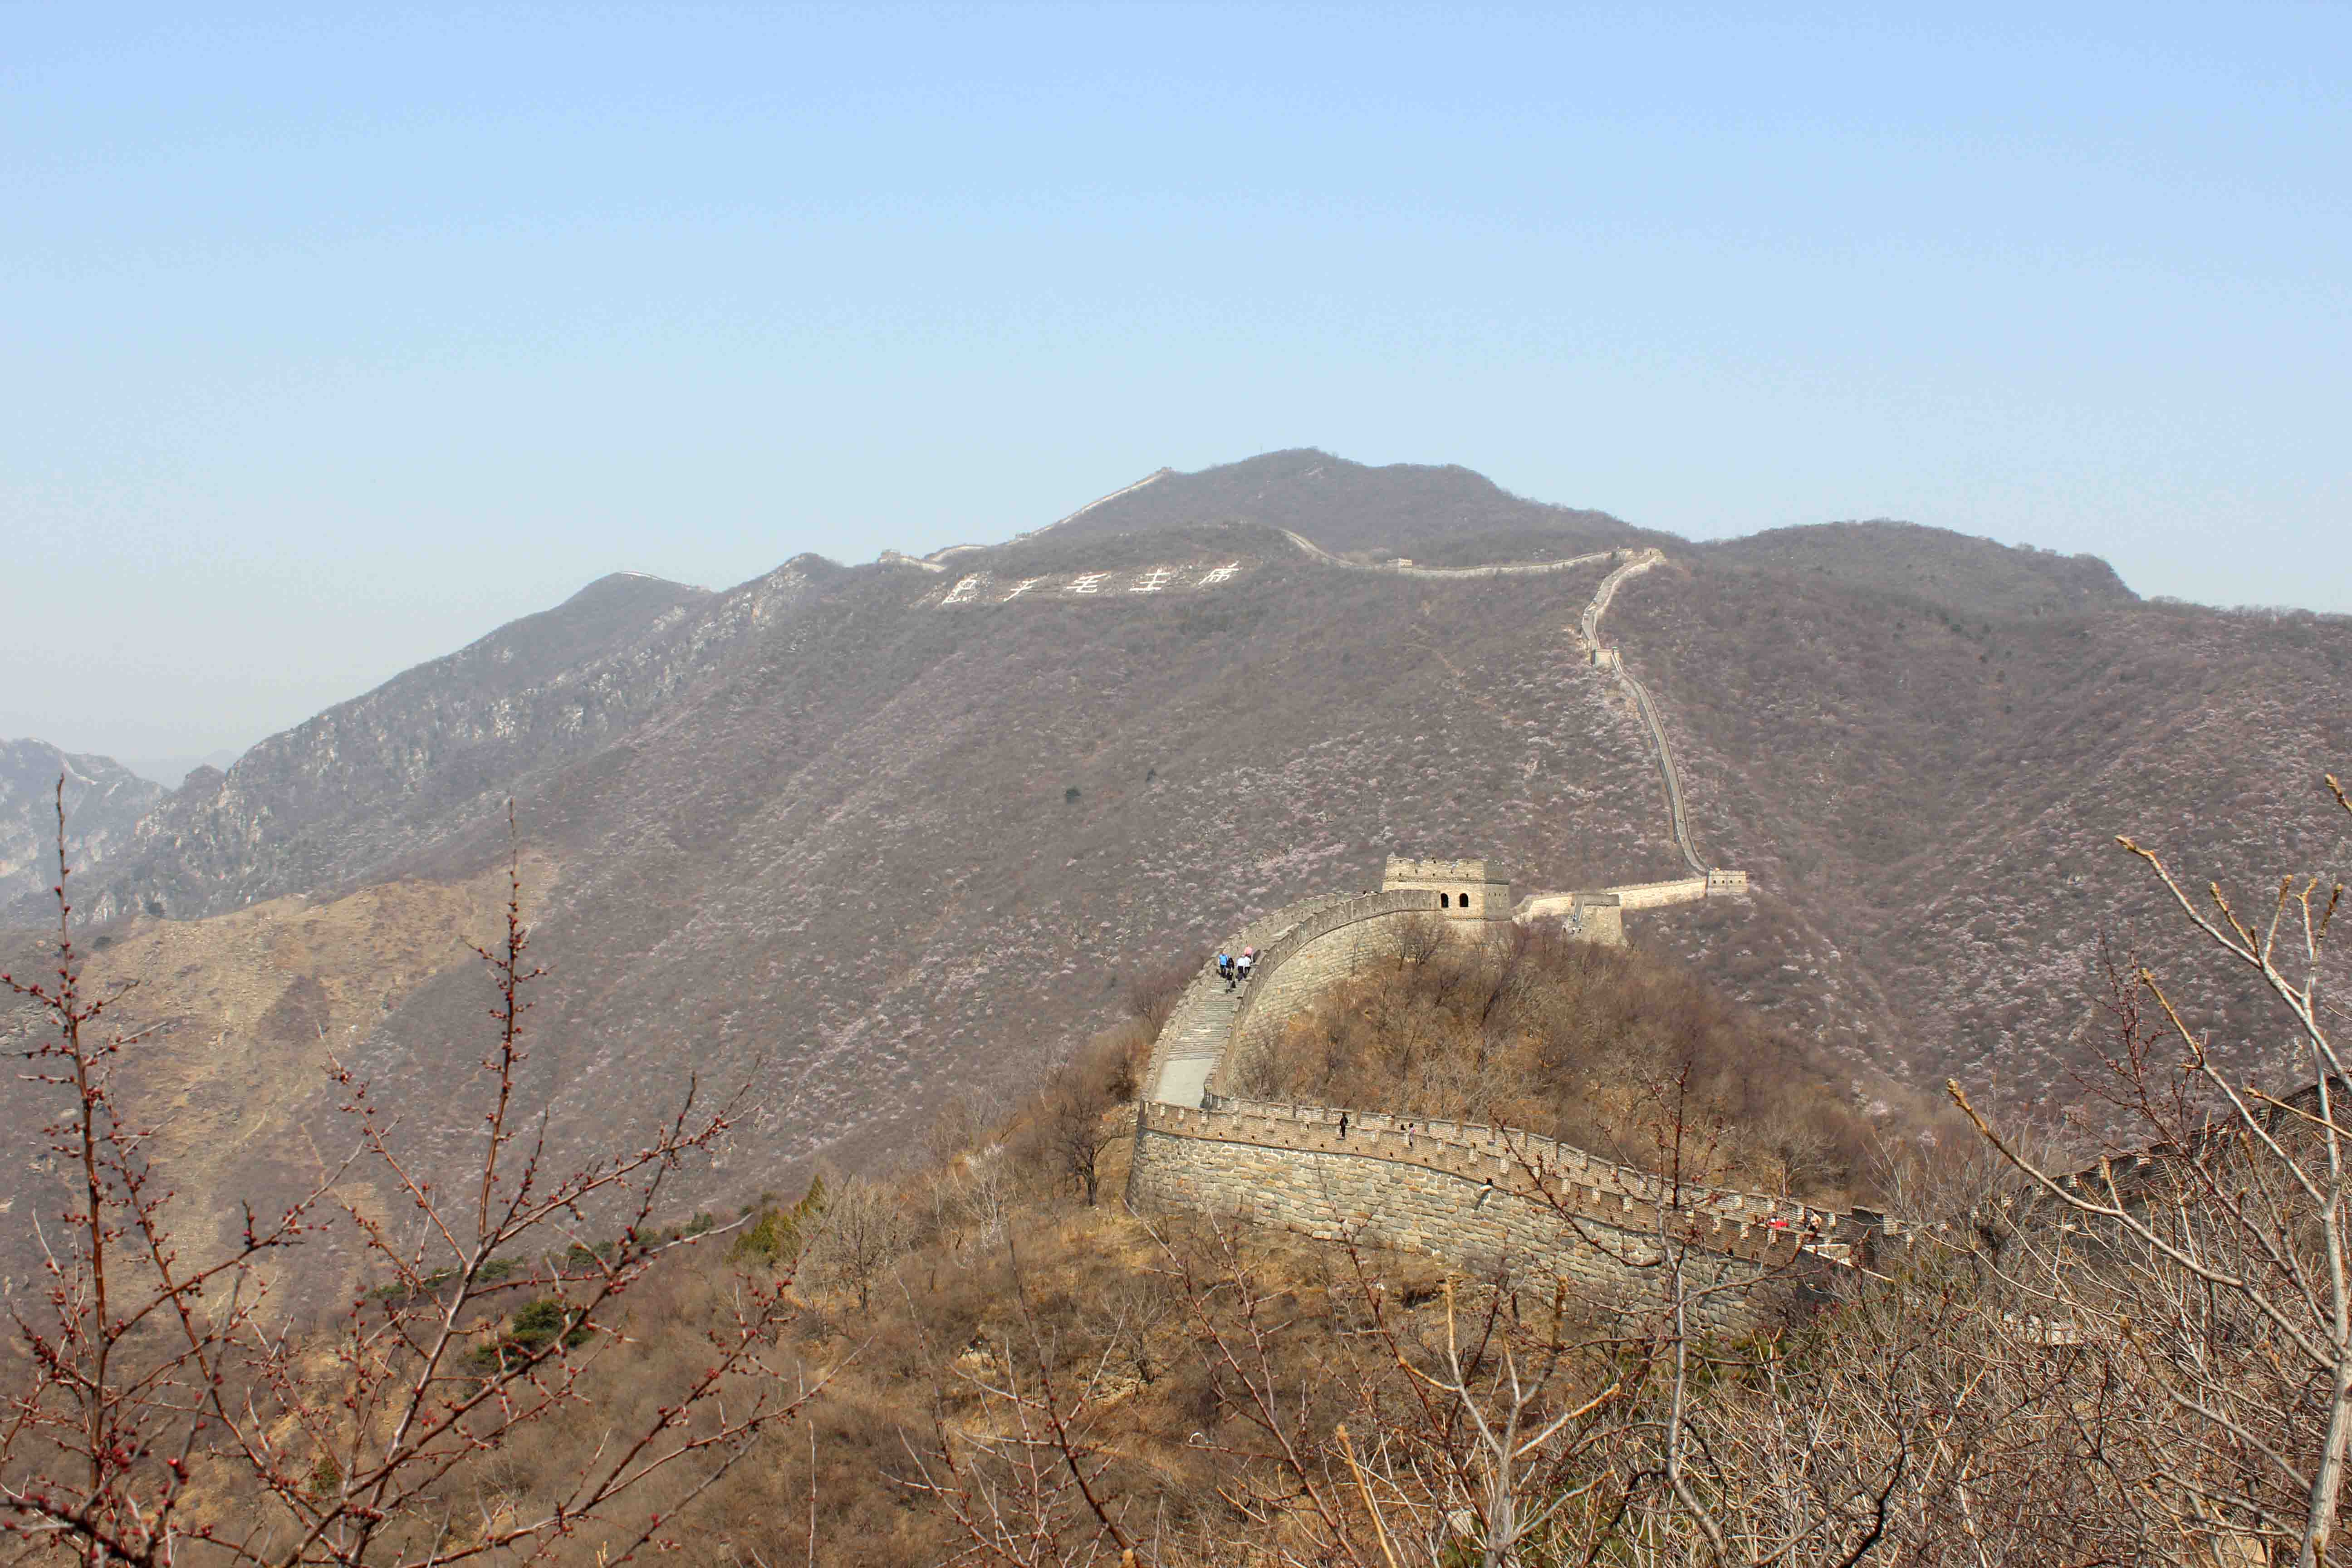 The Mutianyu section is located 70 kilometres northeast of Beijing